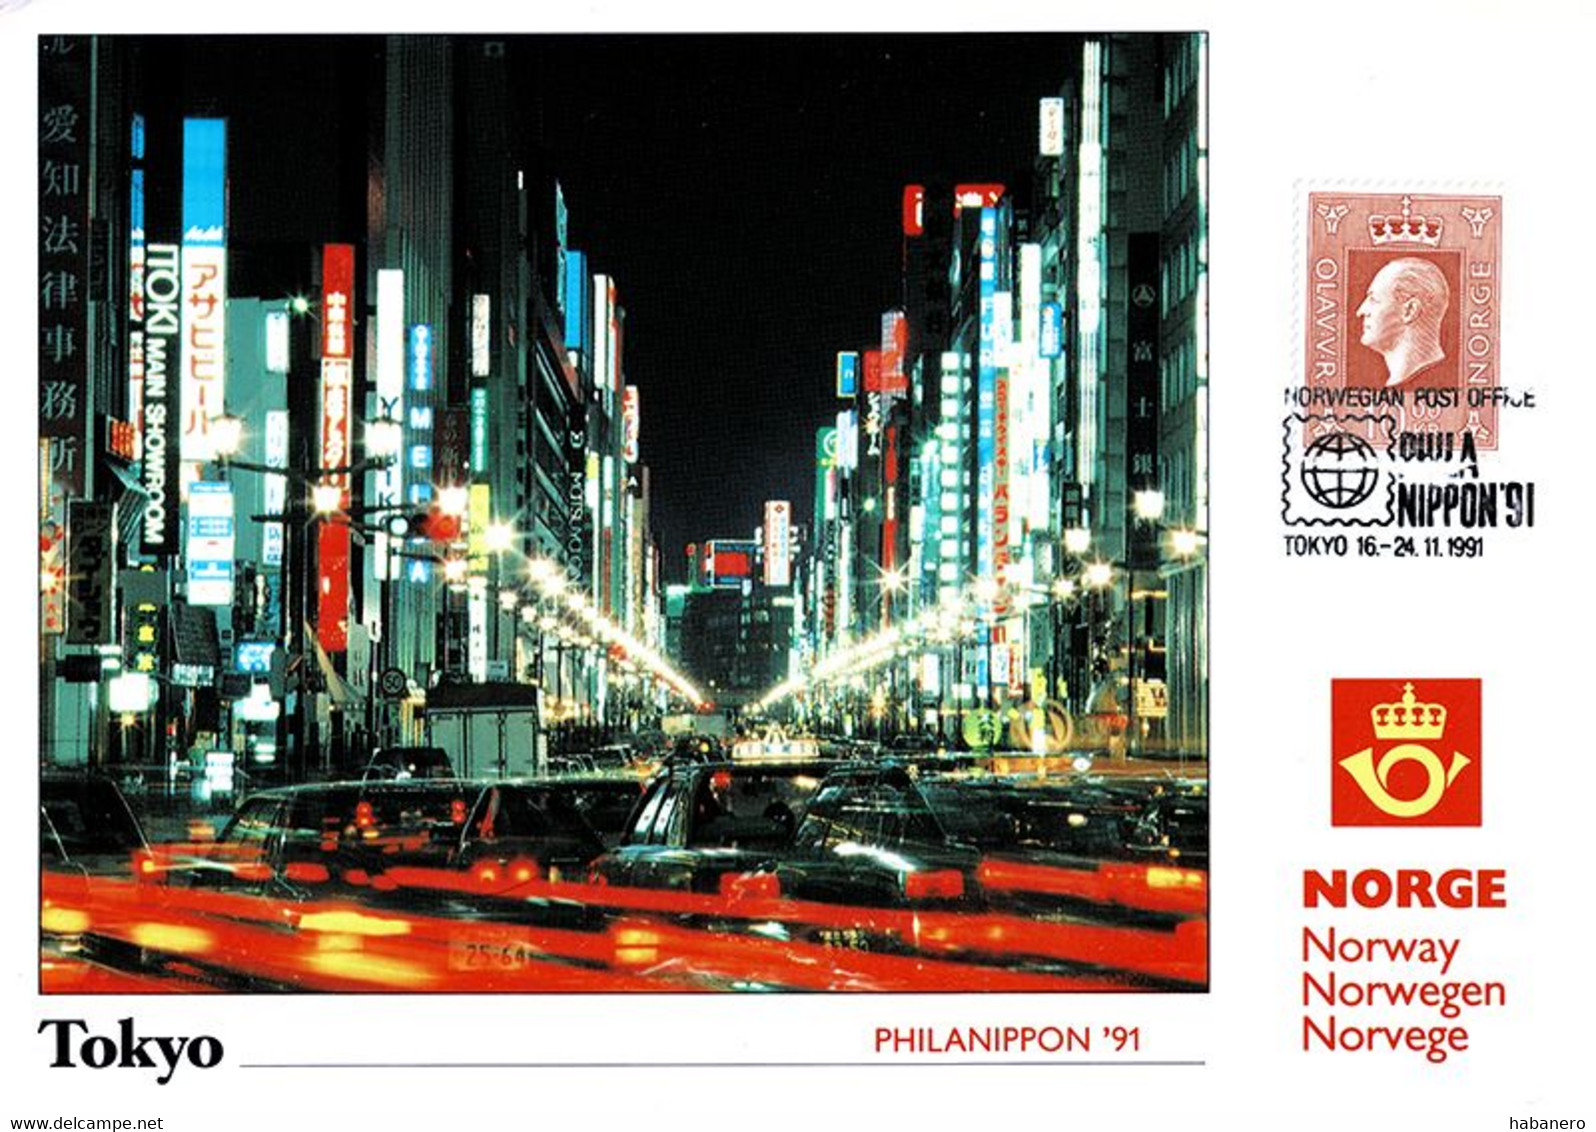 NORWAY 1991 PU88 PHILANIPPON '91 TOKYO EXHIBITION CARD - Maximum Cards & Covers